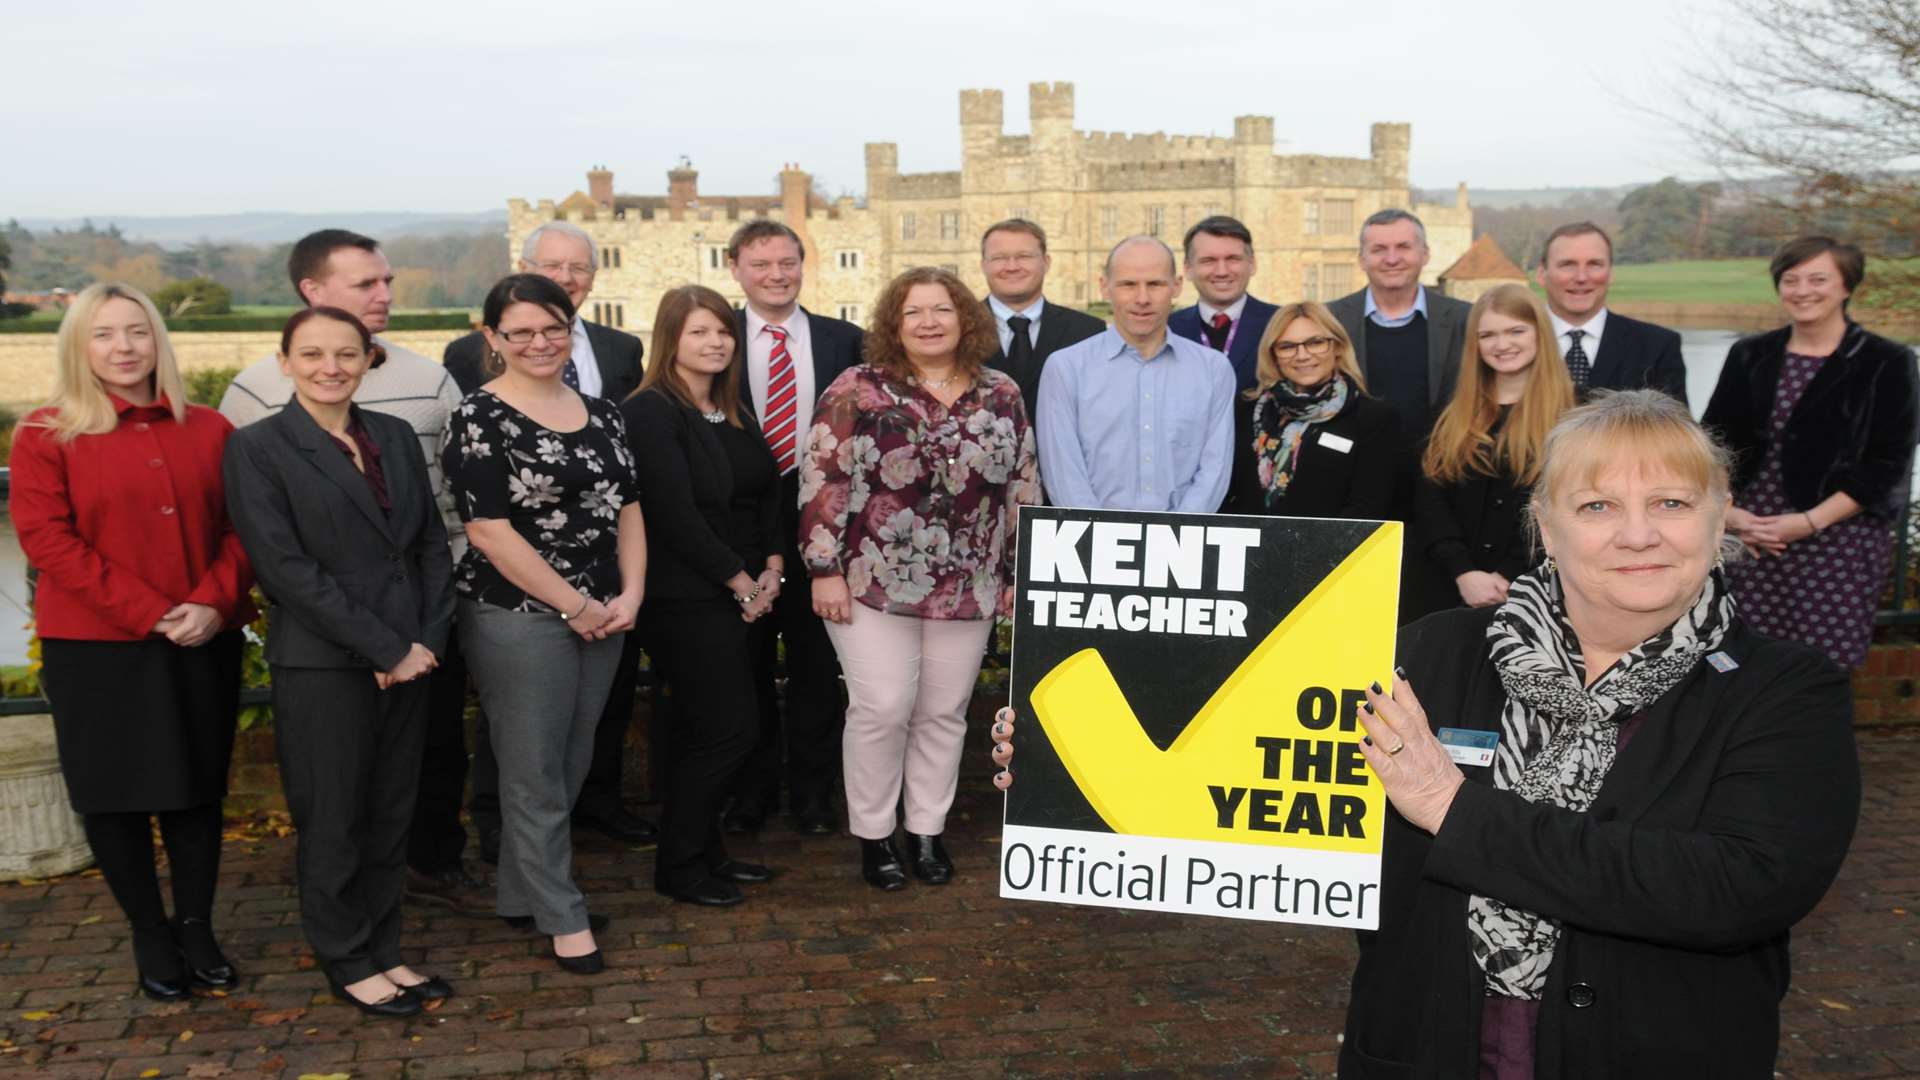 Helen Ellis (front) of Leeds Castle announces support of the Kent Teacher of the Year Awards. Joining her at Leeds Castle were Sally Williamson and Peter Heckel (Project Salus), Amy Woods (3R's), Rebecca Smith (Social Enterprise Kent), Mike O'Brien (Medway Council), Carolyn Dool (Kent Sport), Alex Ffrench and Alyson Howard (William Giles Chartered Accountants, Colin Smith (Brachers Law), Gavin Mountjoy (School of Physical Sciences), Craig Garton (CXK), Catherine Carden (Canterbury Christchurch), Martin Ridout (School of Mathematics, Statistics and Actuarial Sciences), Dr Anthony Baines (School of Biosciences) and Nicola Podd (SELT).